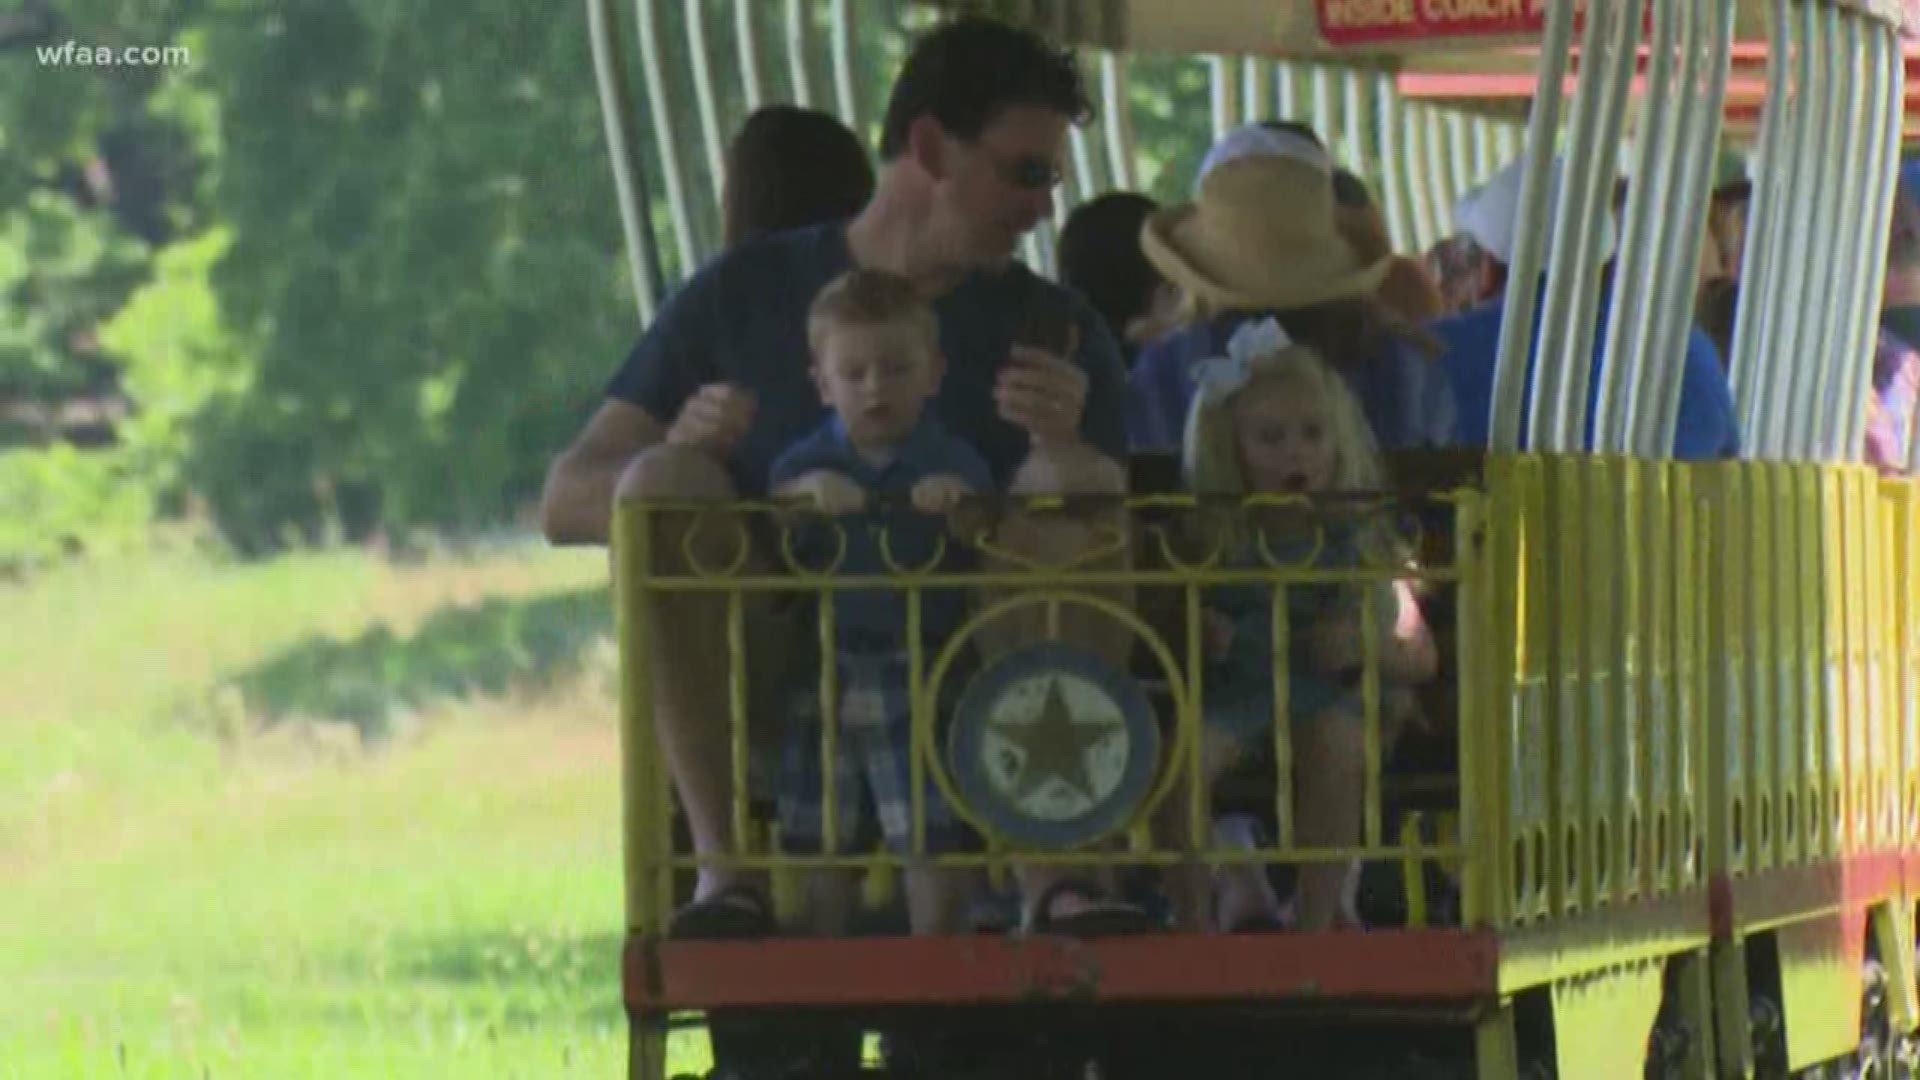 Forest Park Miniature Train celebrates 60th year of taking passengers through Fort Worth Parks